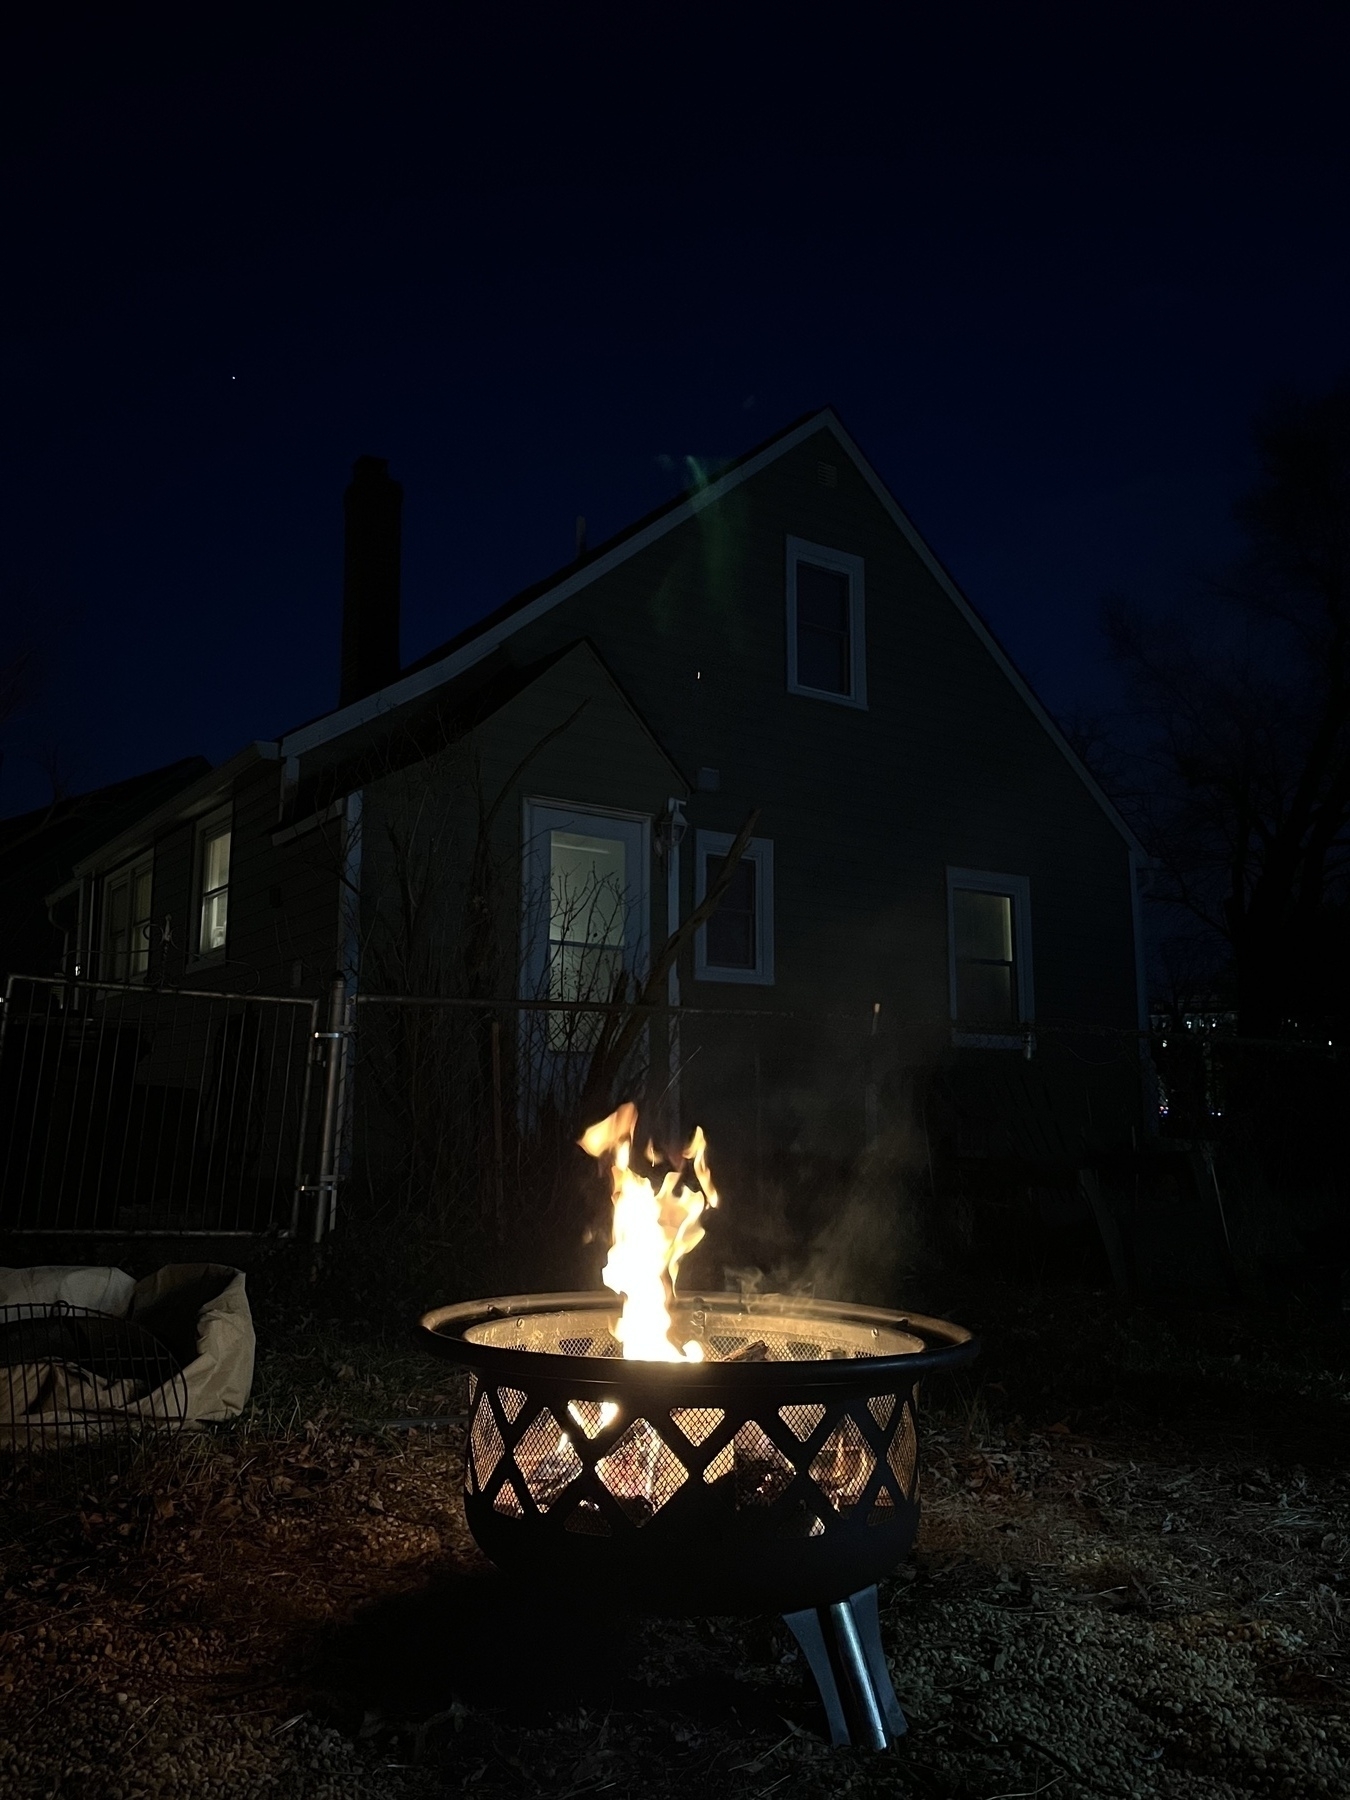 A fire pit with rising flames in a backyard at dusk, with a darkened house in the background and a clear evening sky above.